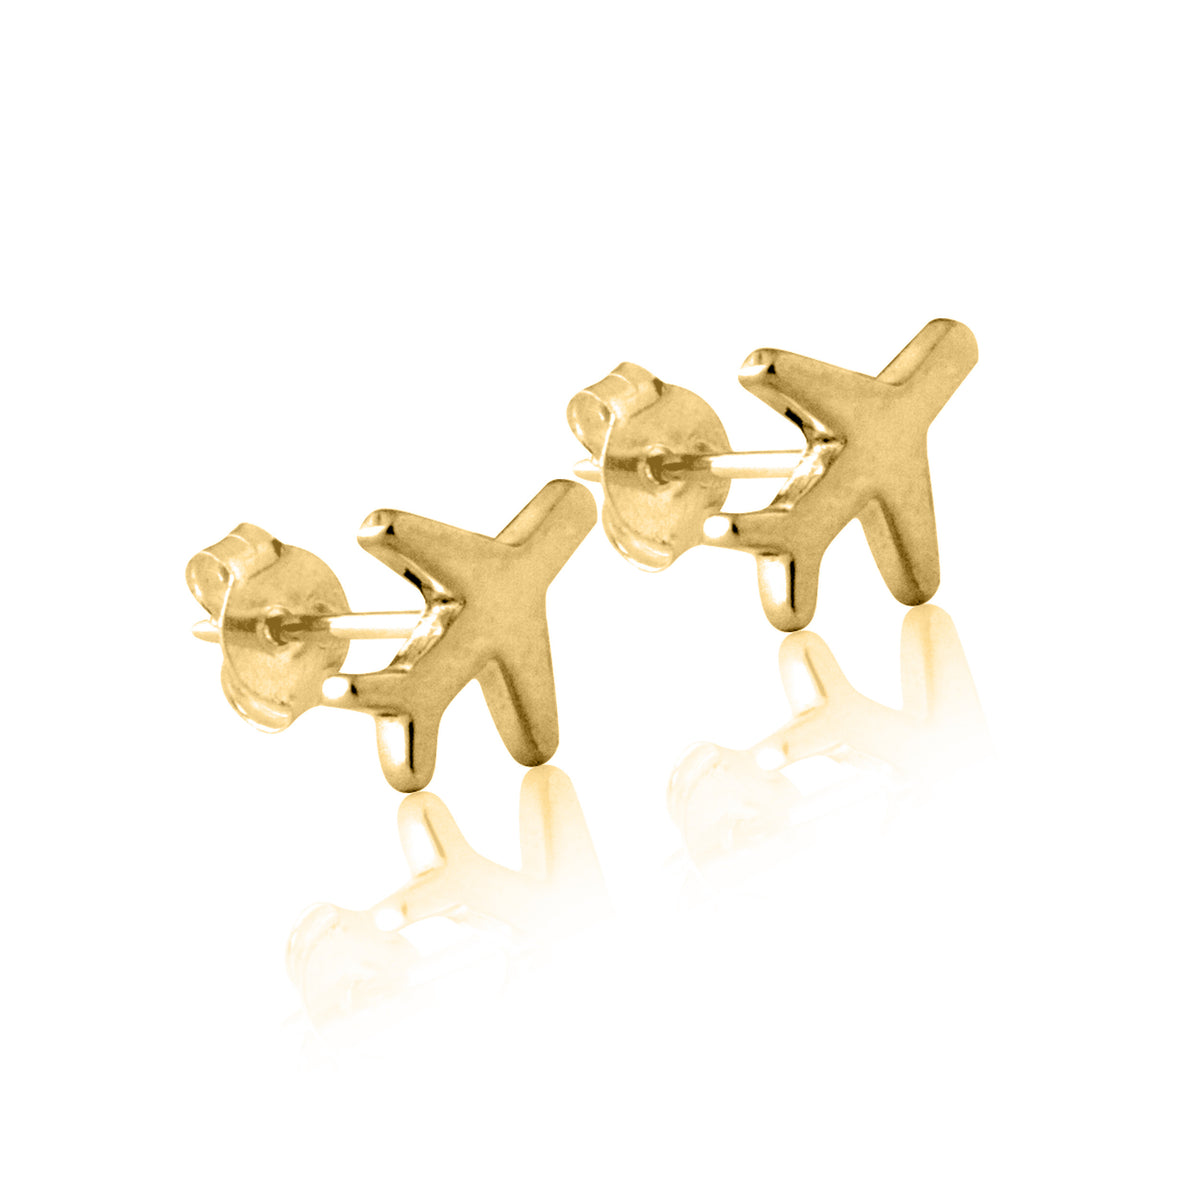 Plane Charm Necklace for Men 14k Solid Gold Airplane Pendant -  Israel